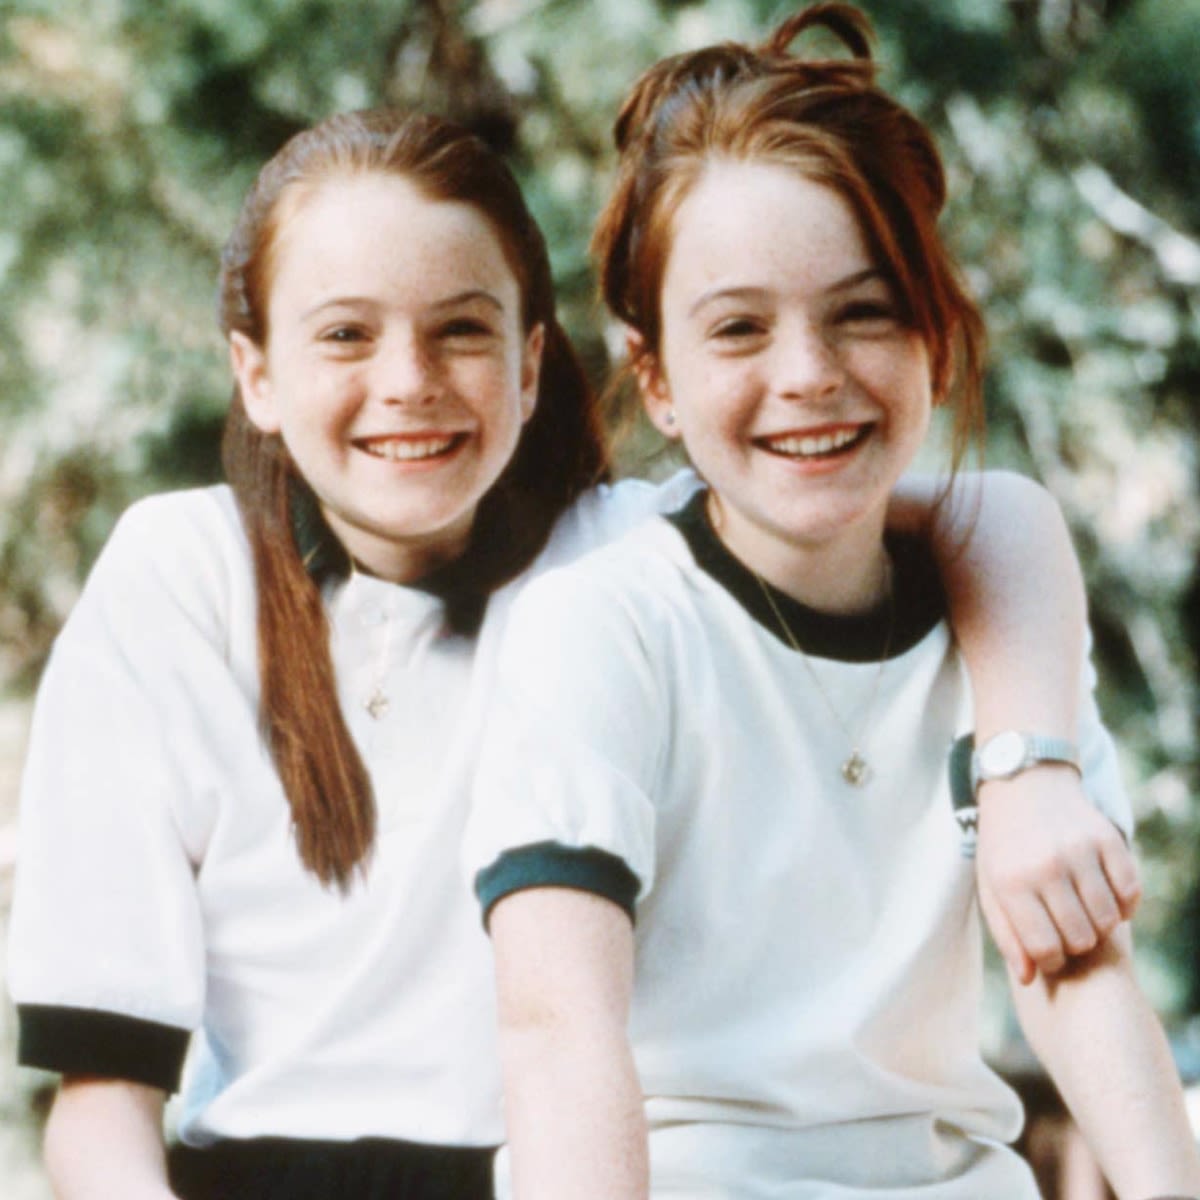 Parent Trap 's Lindsay Lohan & Real-Life Hallie Reunite 26 Years Later